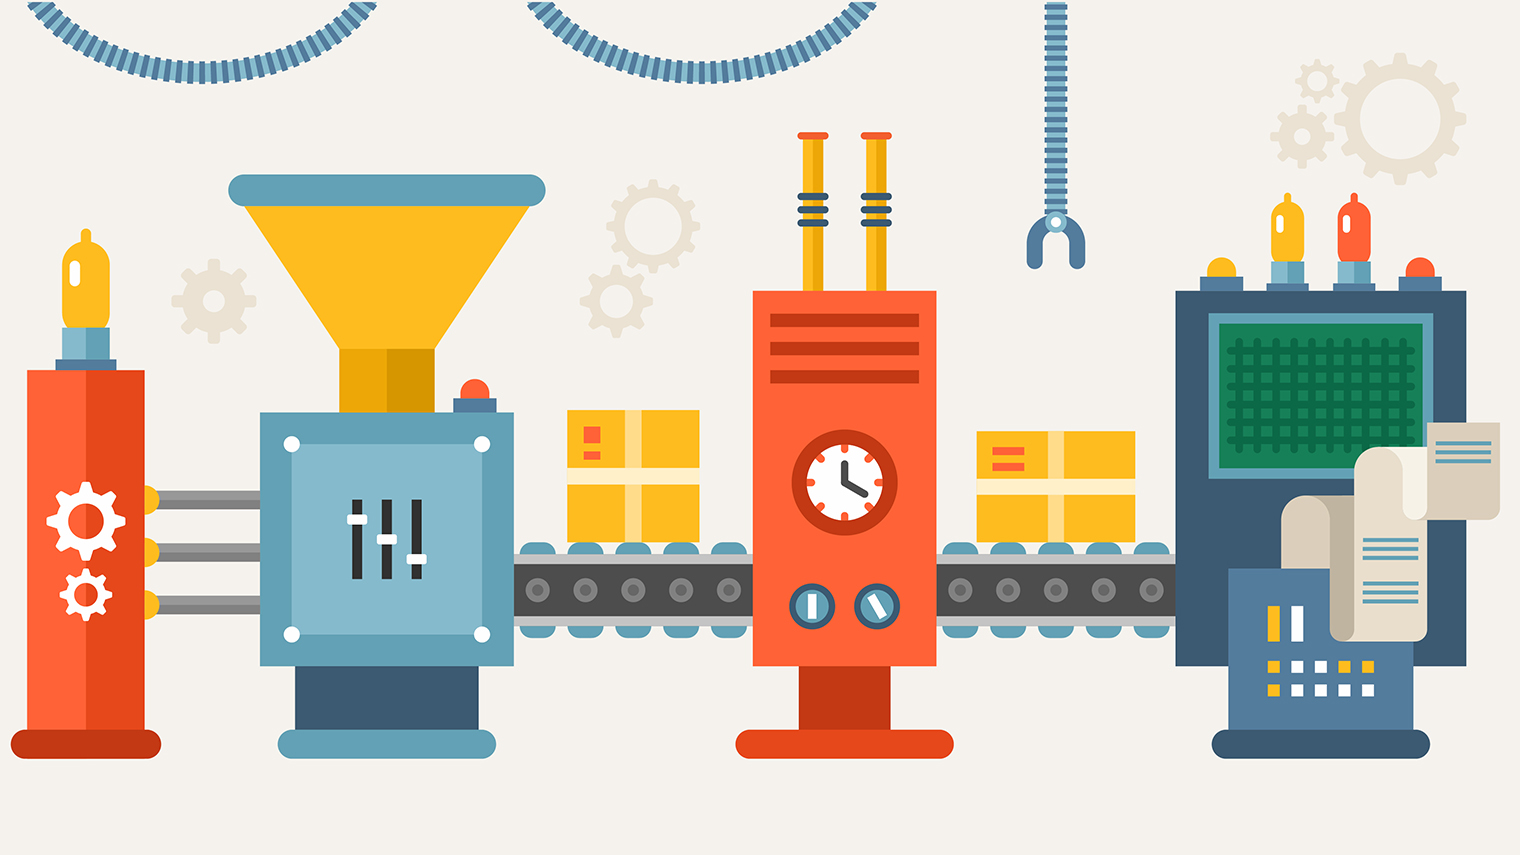 Productivity is key: how manufacturing can increase efficiency